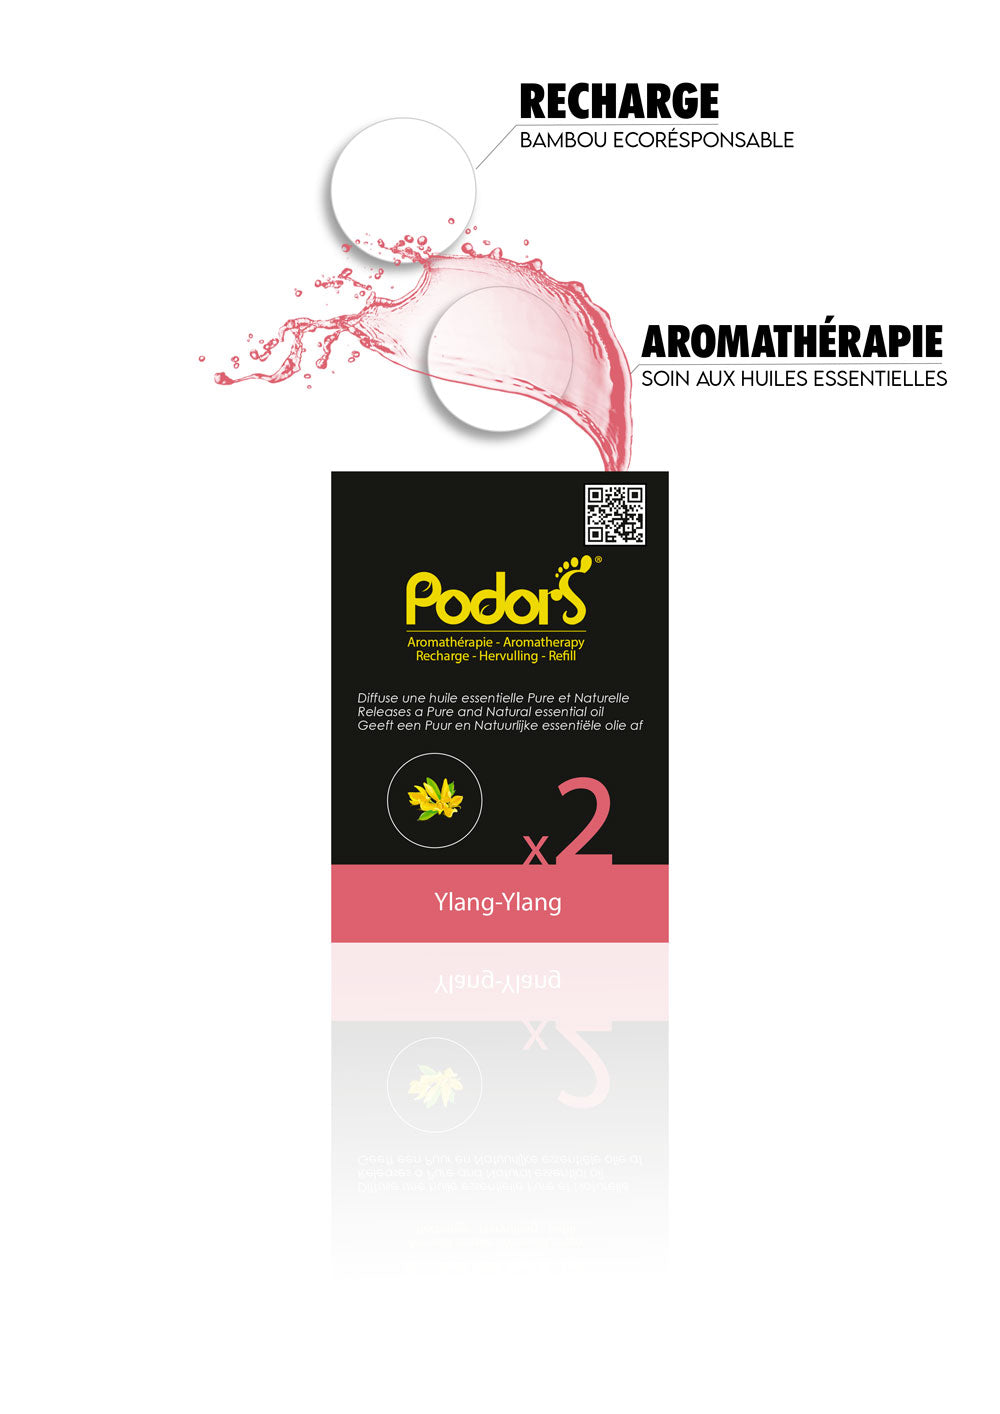 Recharges Podors® aux huiles essentielles d'ylang-ylang